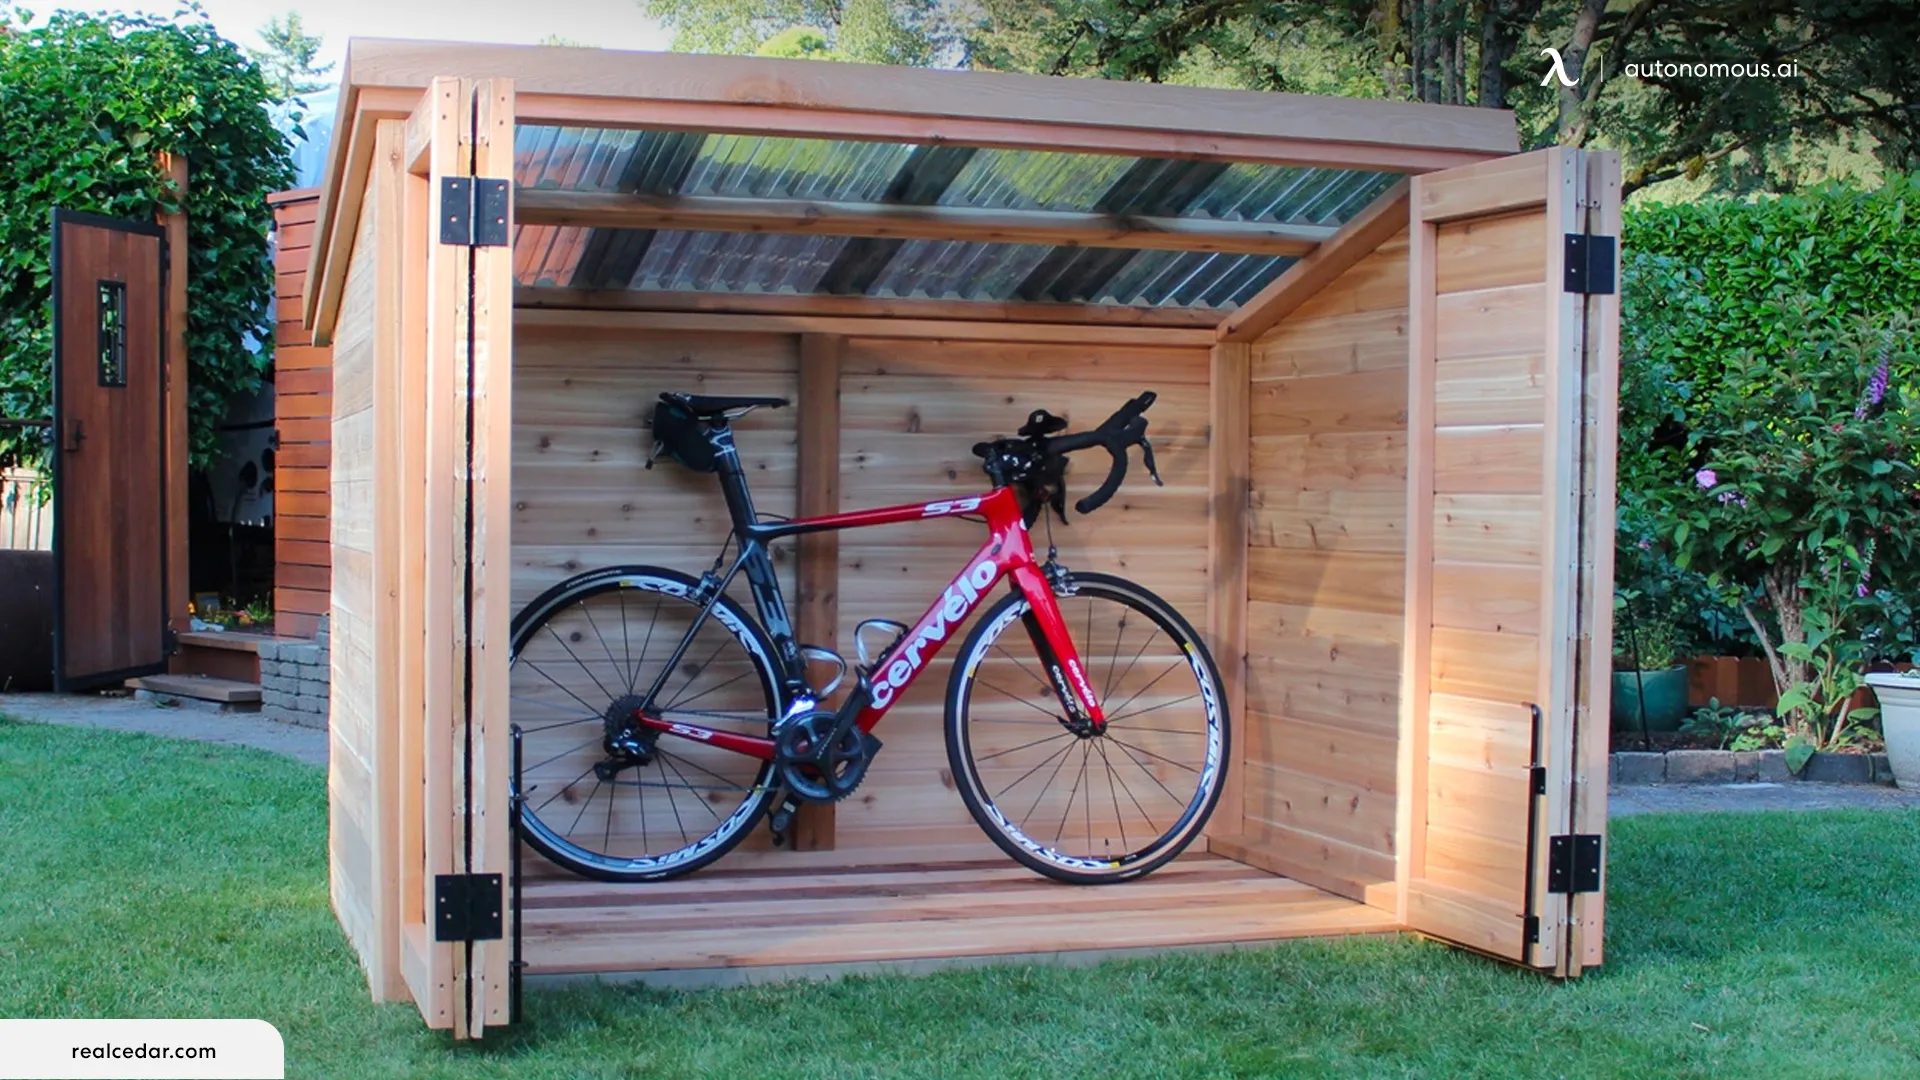 Build Your Own Bike Shed: DIY Tips and Tricks